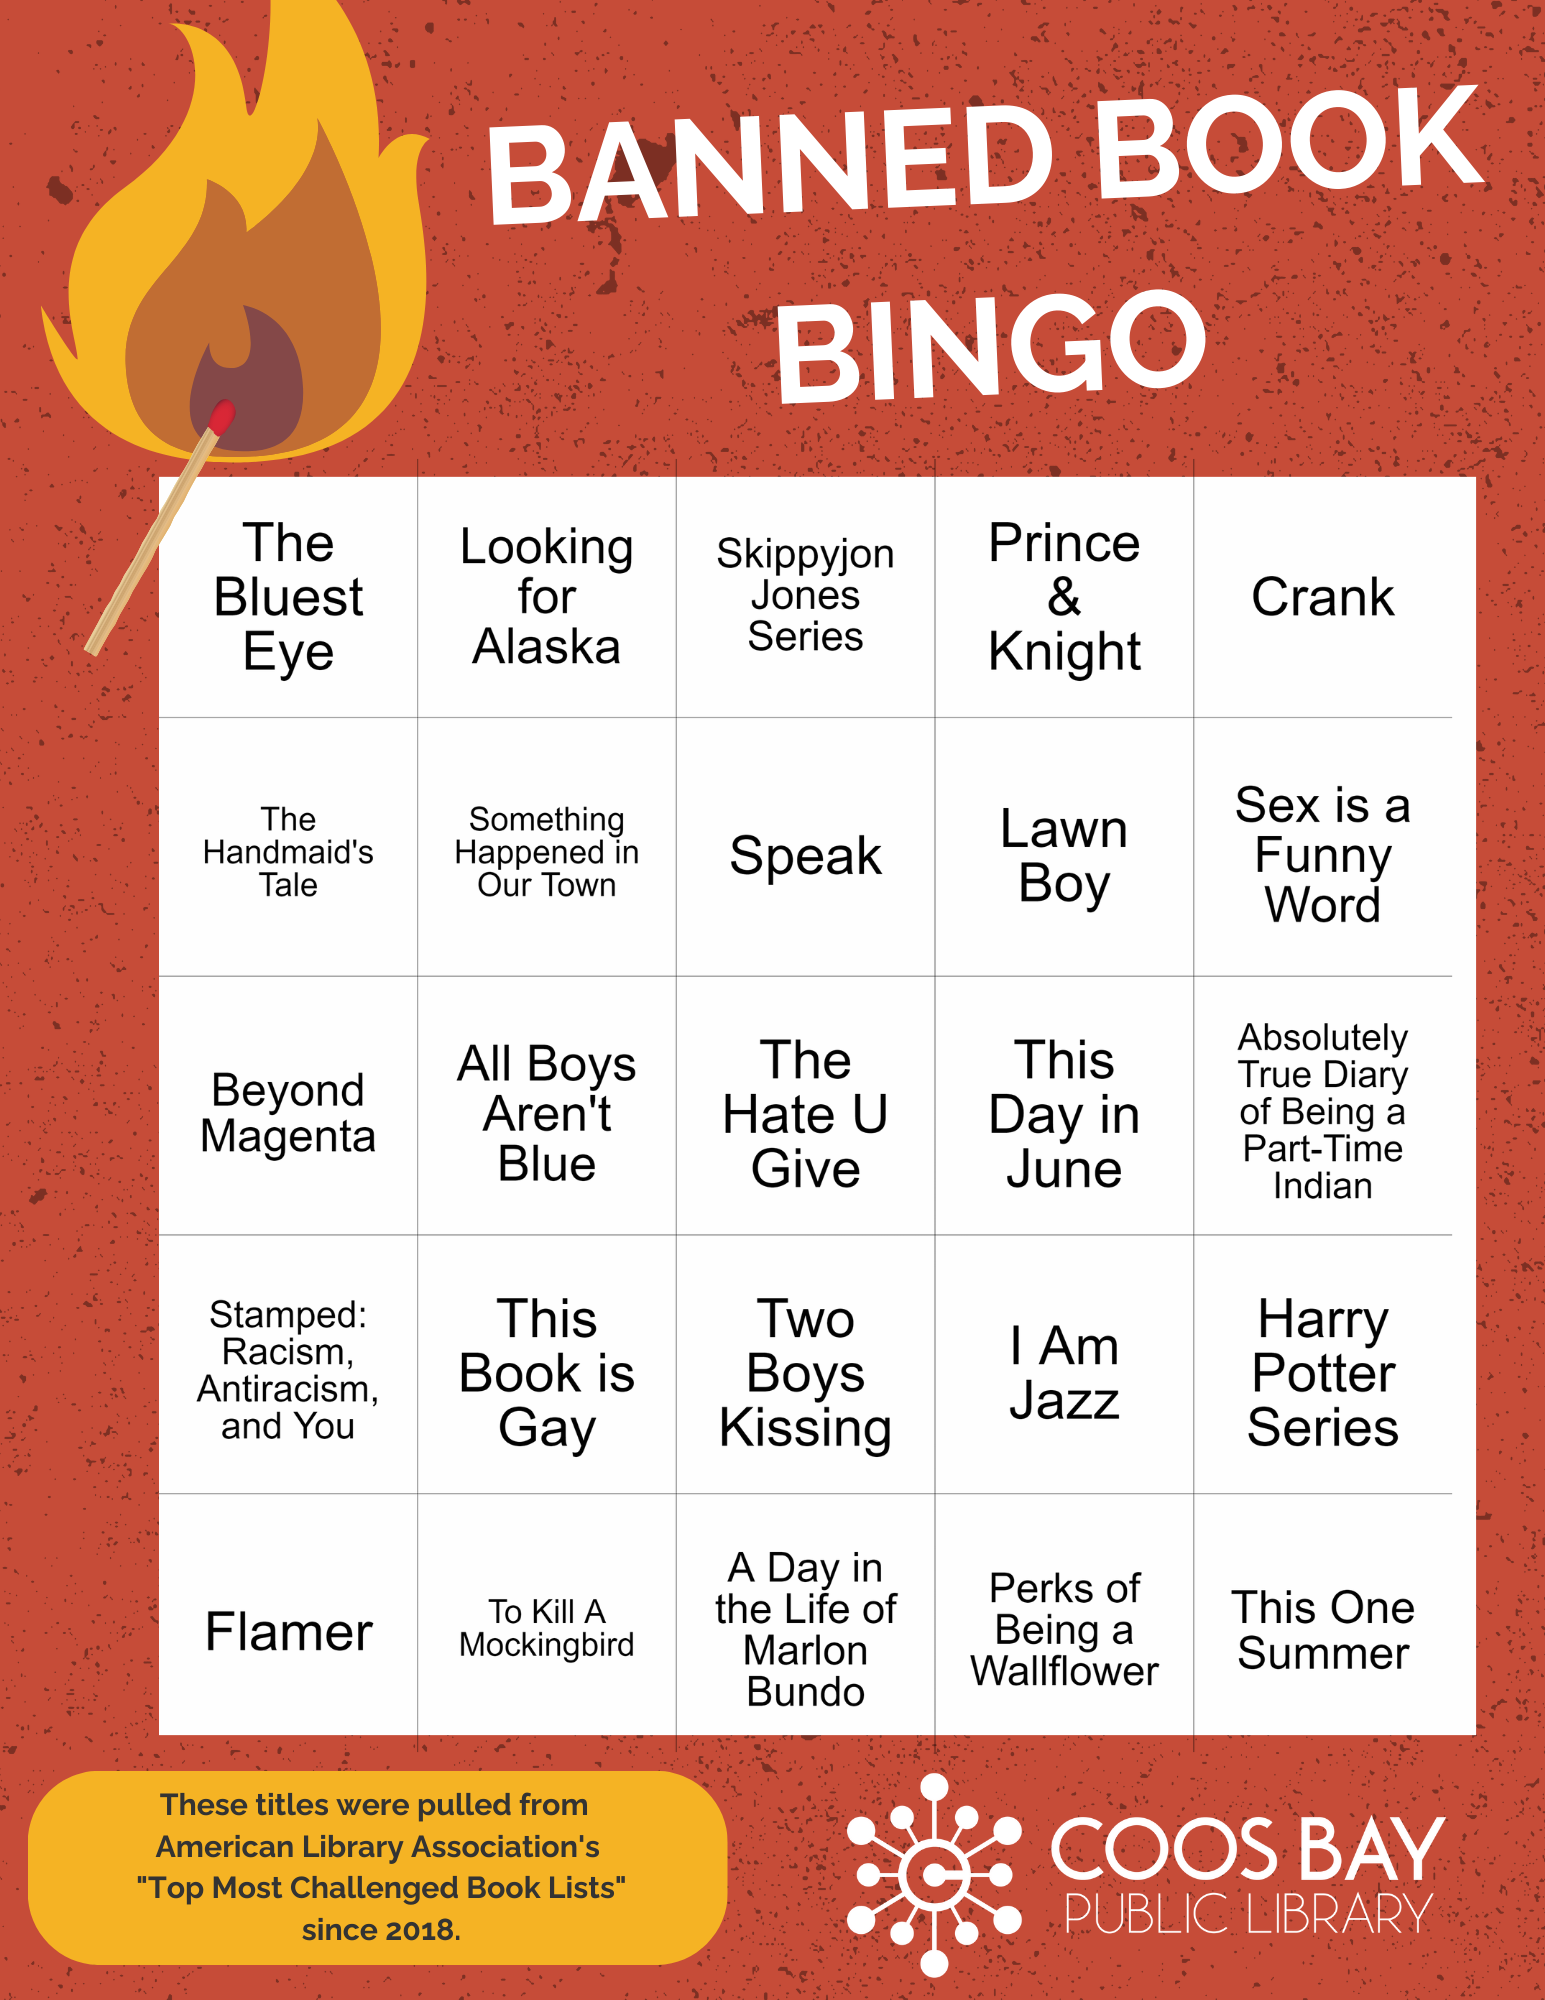 Bingo Card with banned book titles